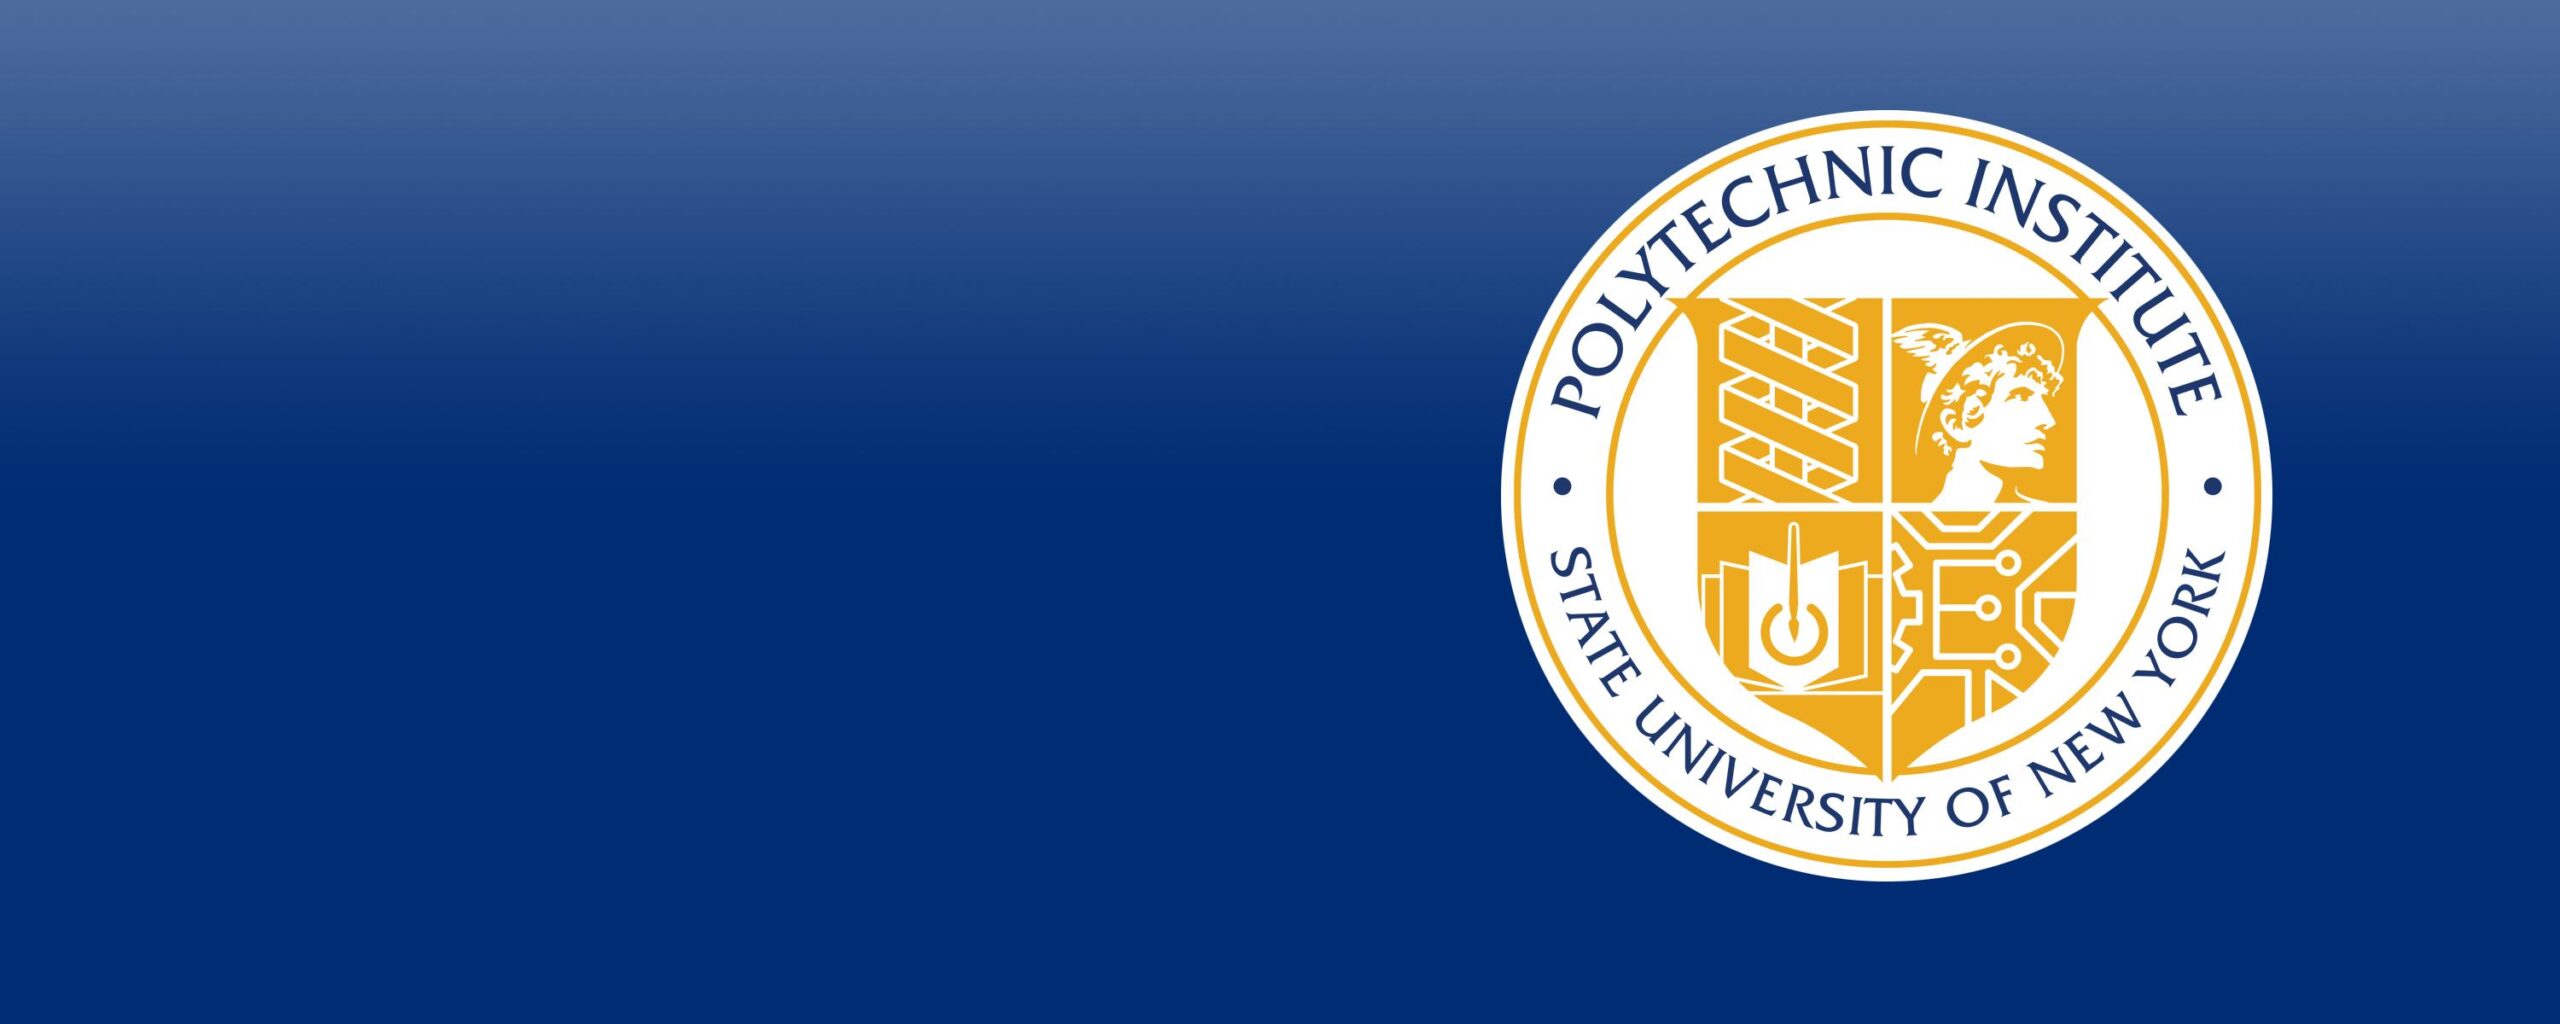 SUNY Poly seal with blue background